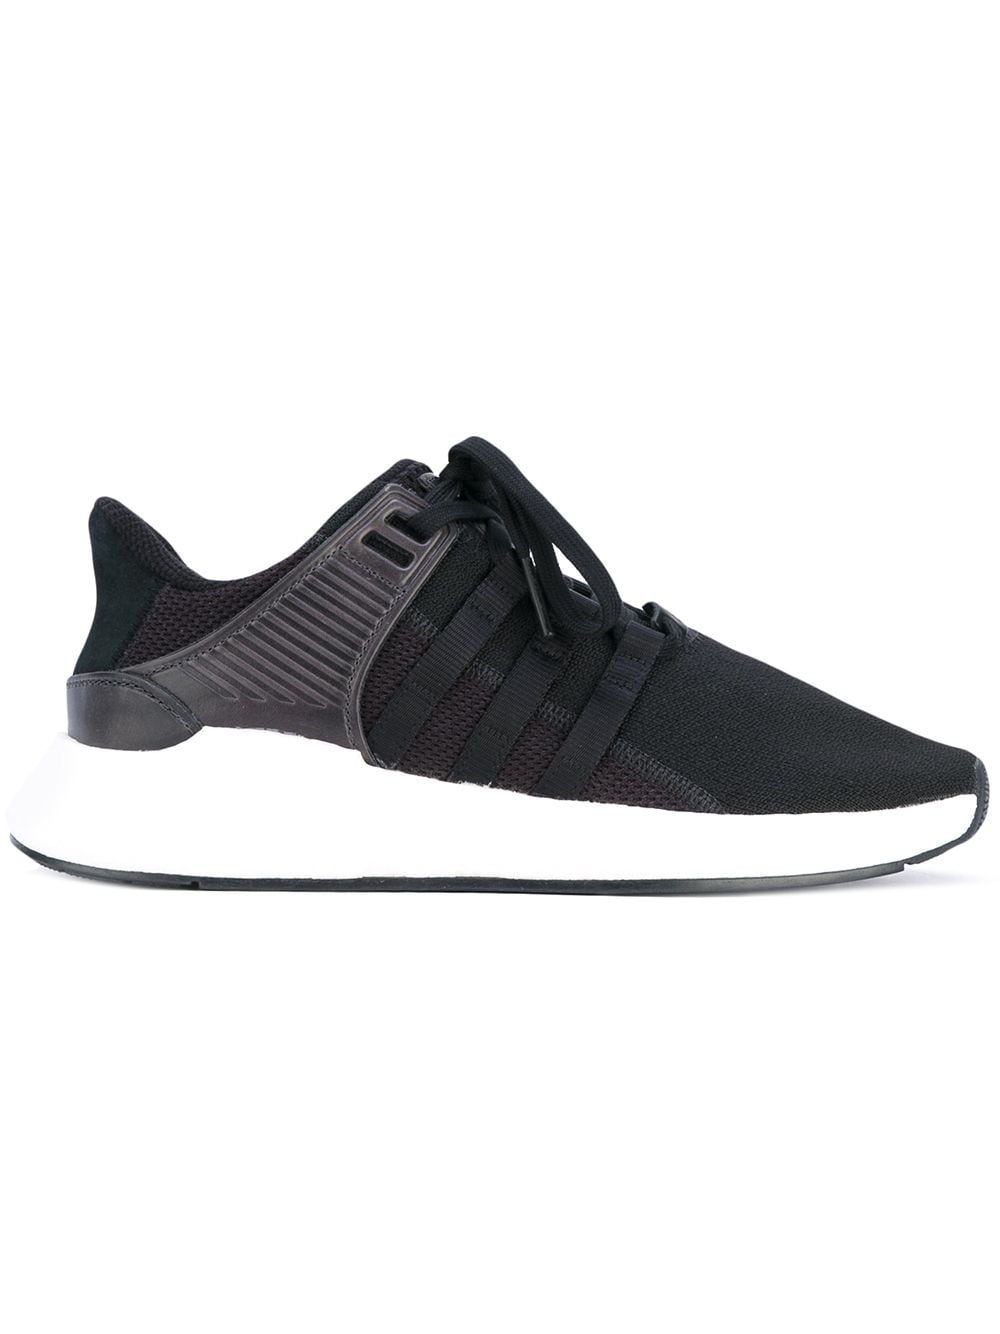 adidas EQT Support 93/17 "Milled Leather" sneakers - Black von adidas